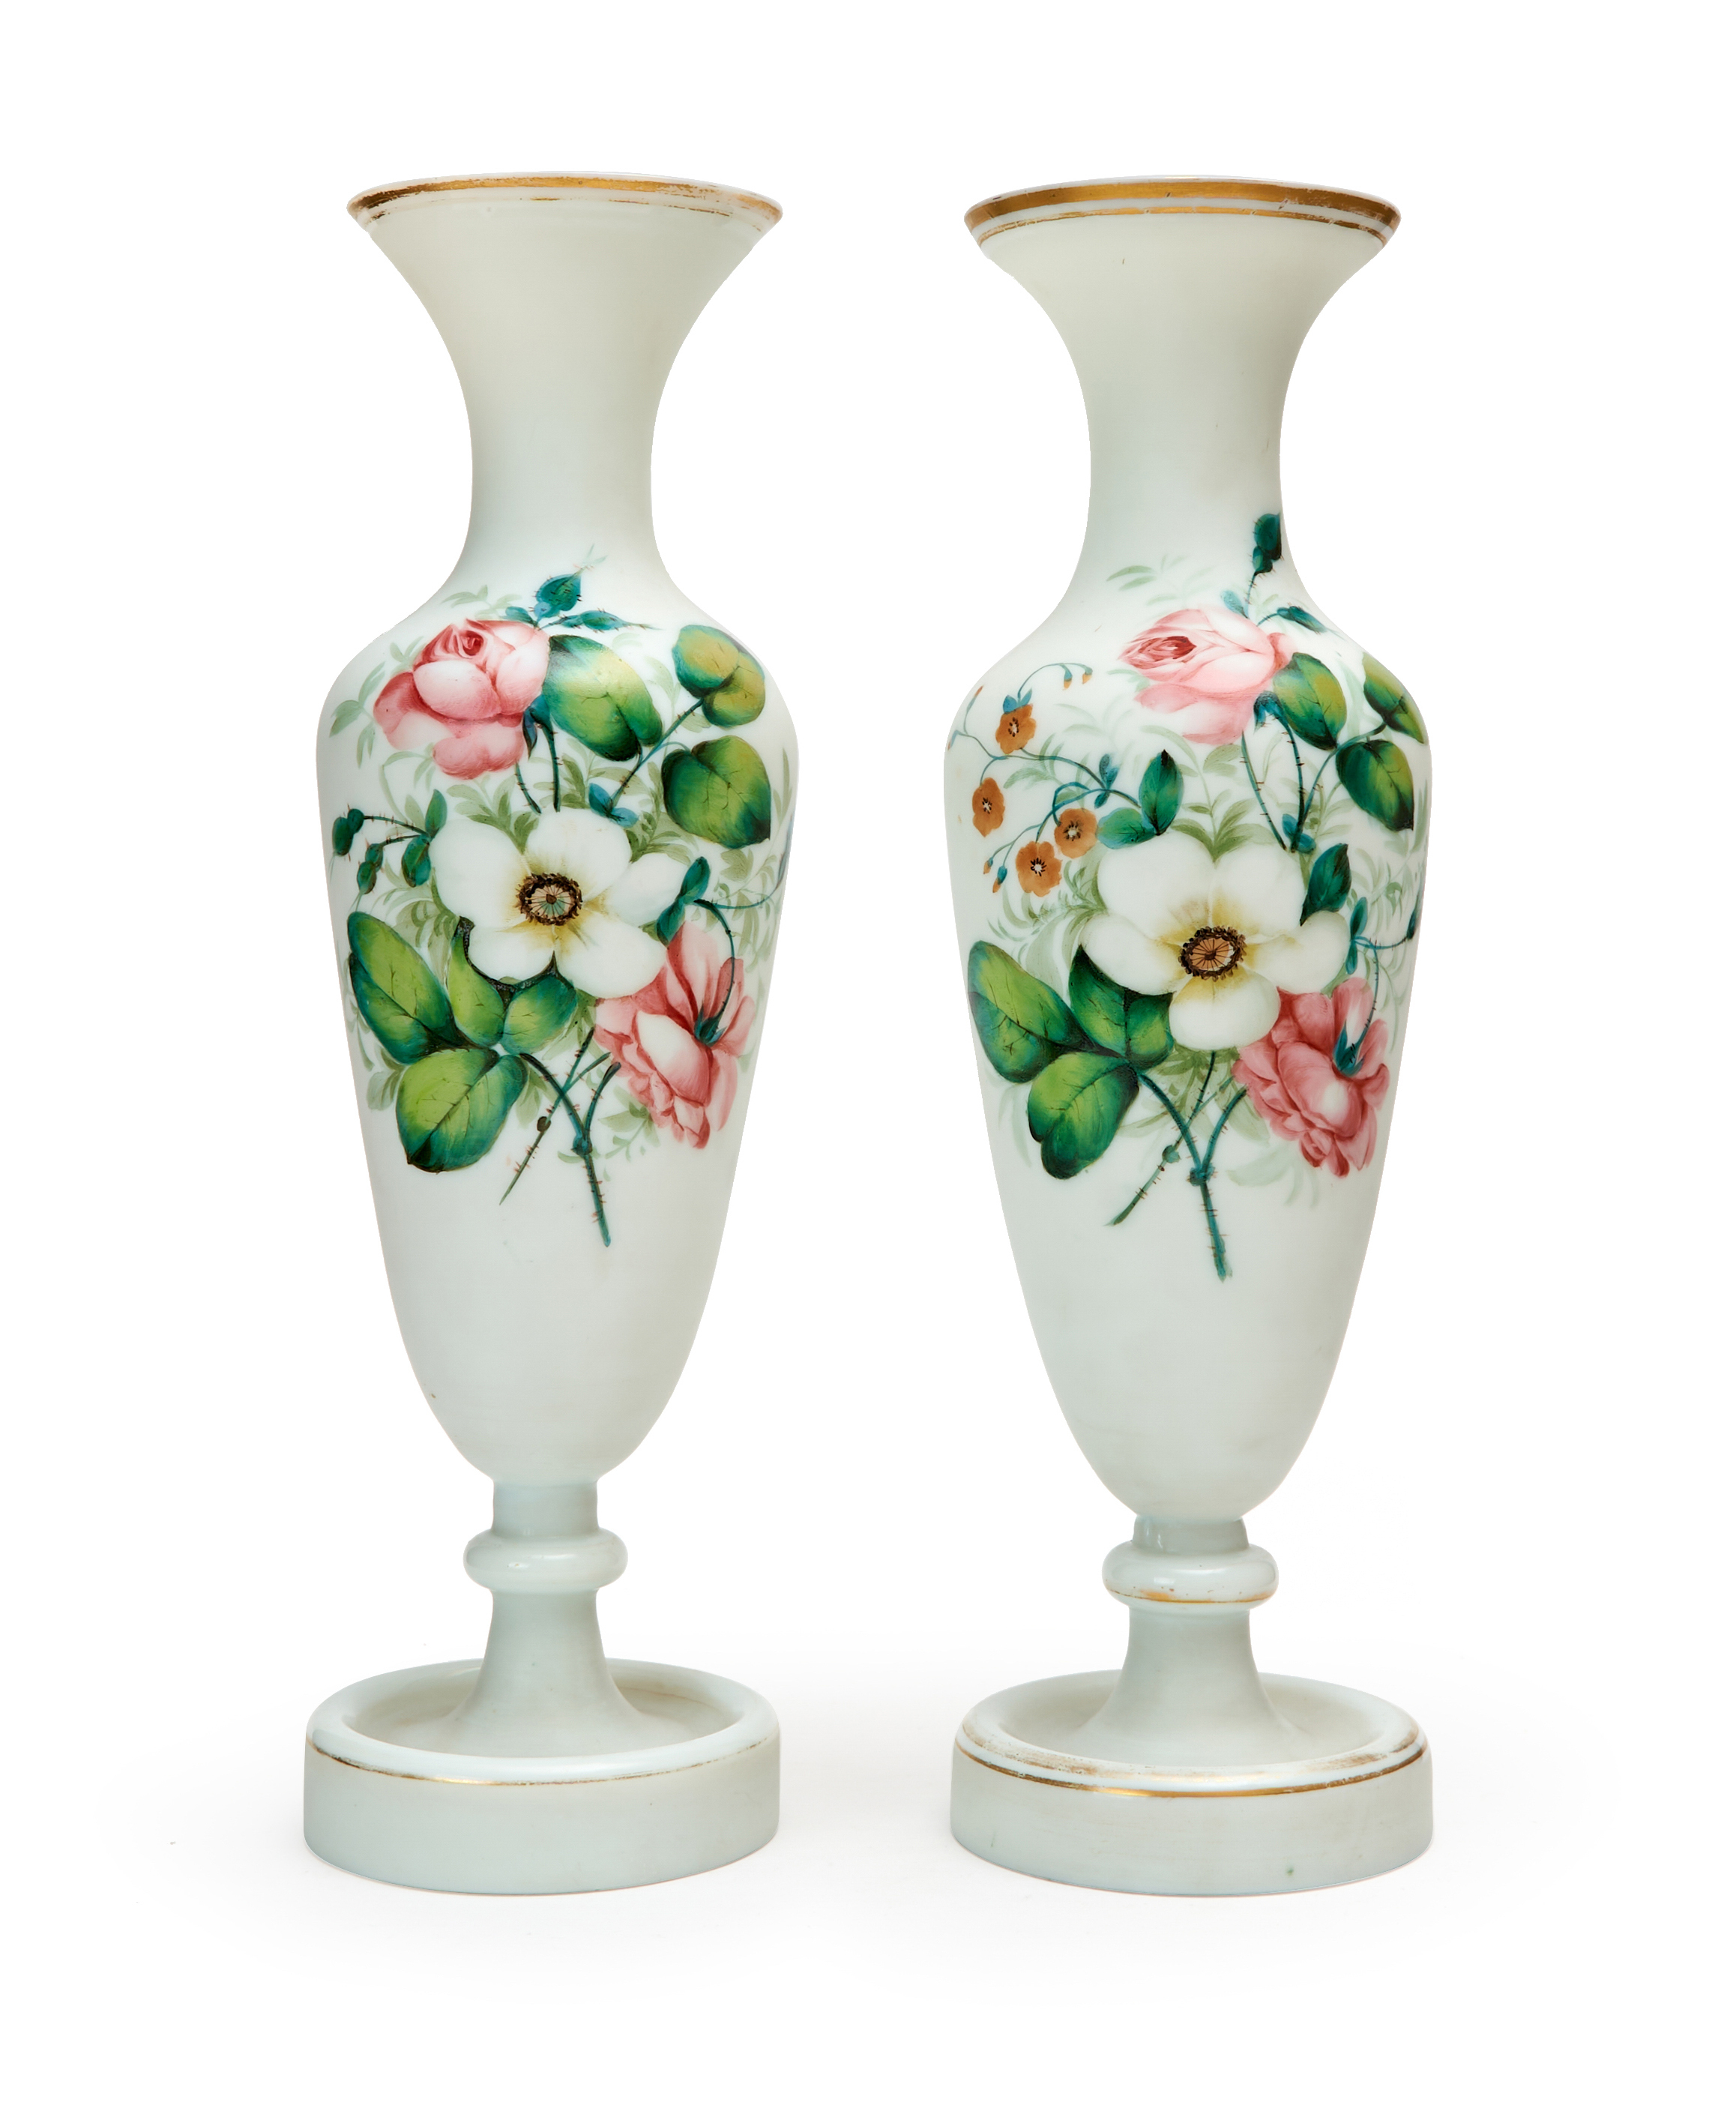 A PAIR OF BOHEMIAN FLORAL VASES, 19TH CENTURY